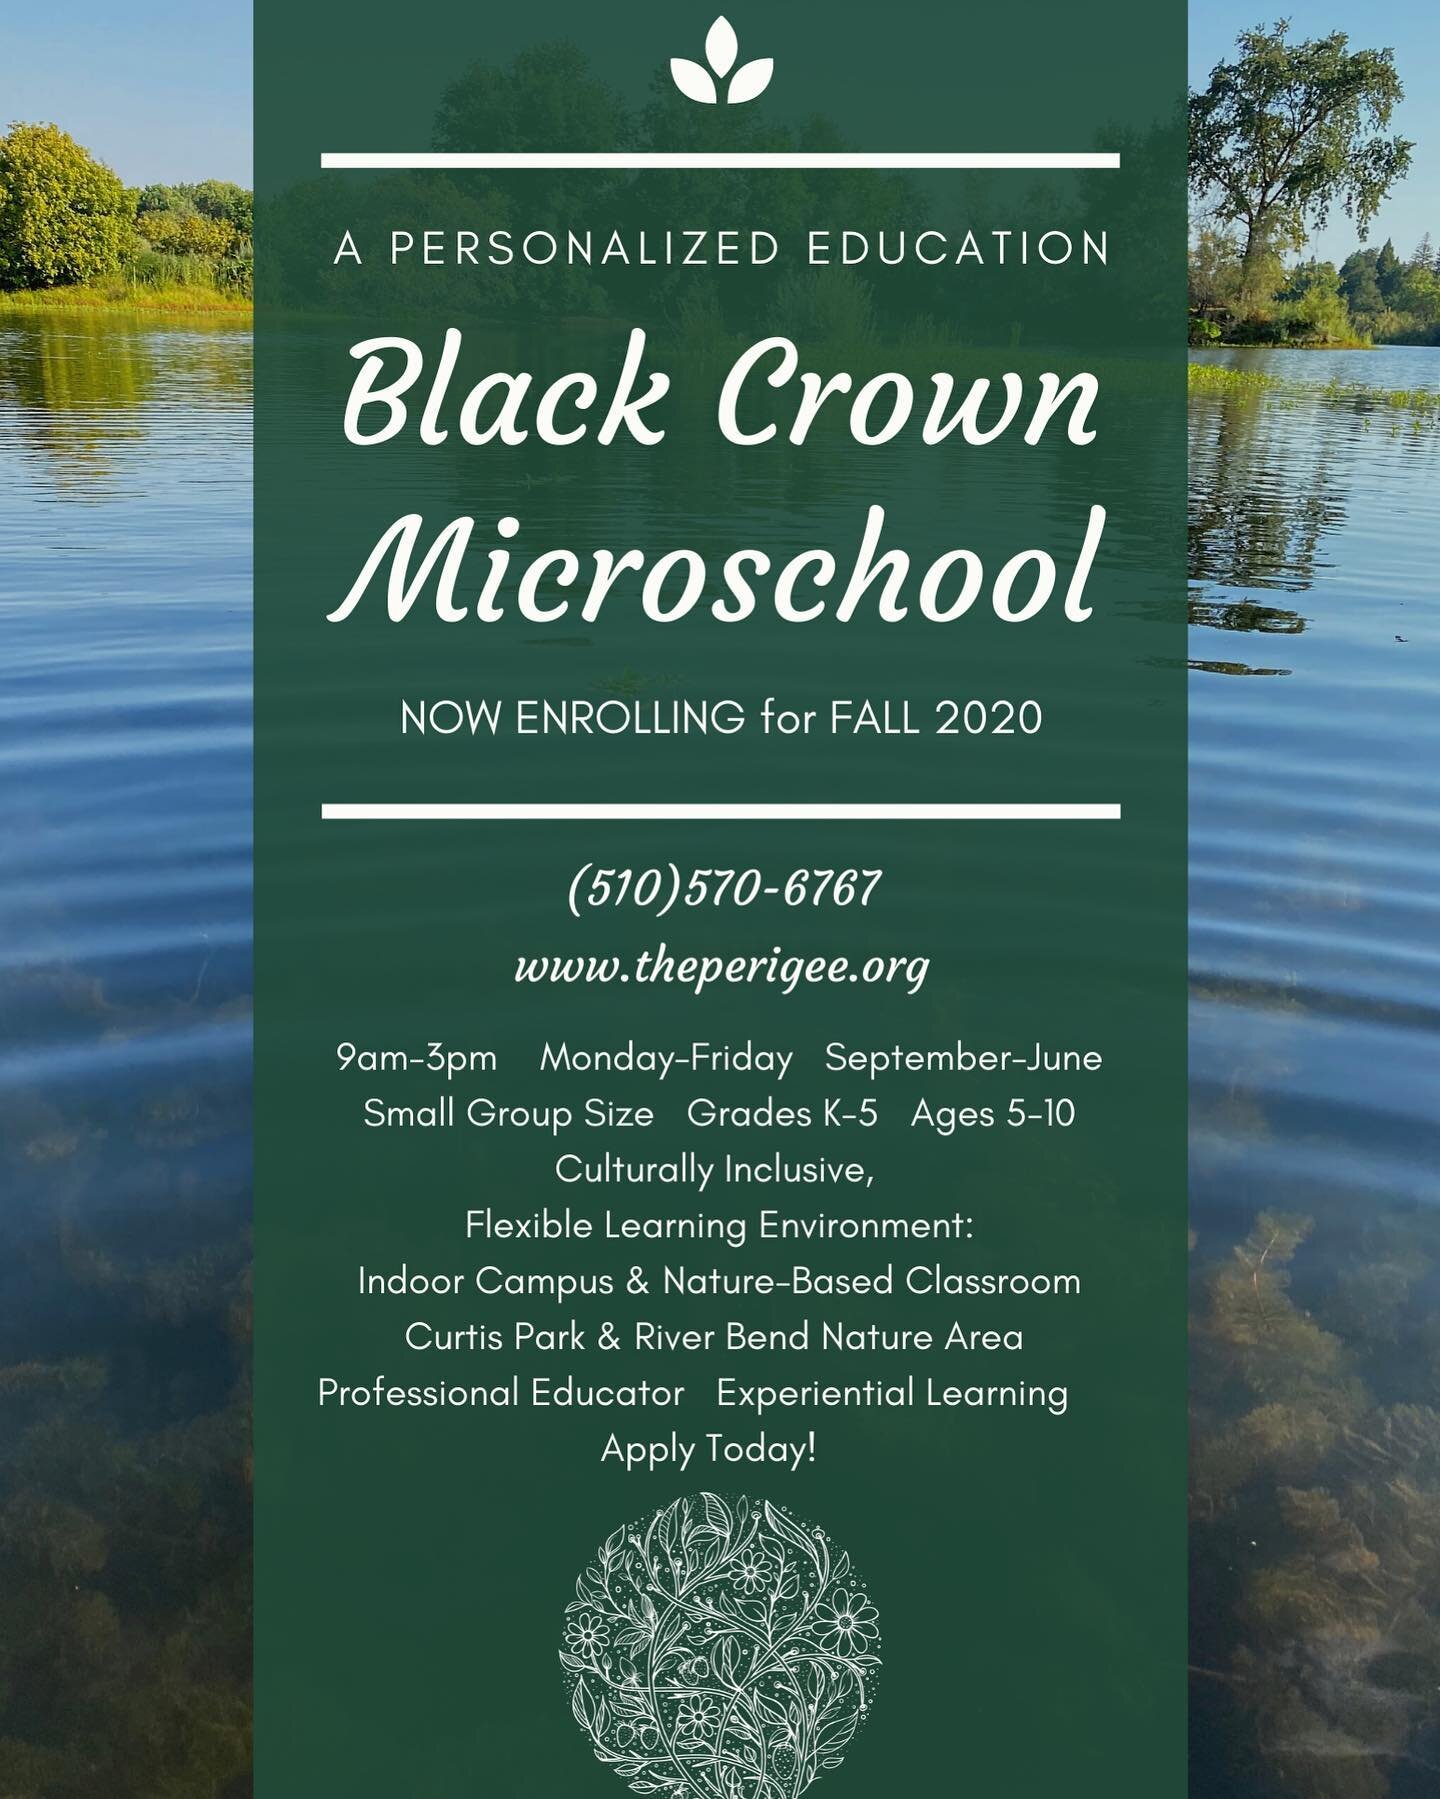 Welcome to Black Crown Microschool! A personalized Perigee education. We are now enrolling for fall 2020!  Spaces are limited. 
Here are the basics: 
☆9am-3pm 
☆Beginning in September and ending in June
☆Culturally inclusive community 
☆Small, contro